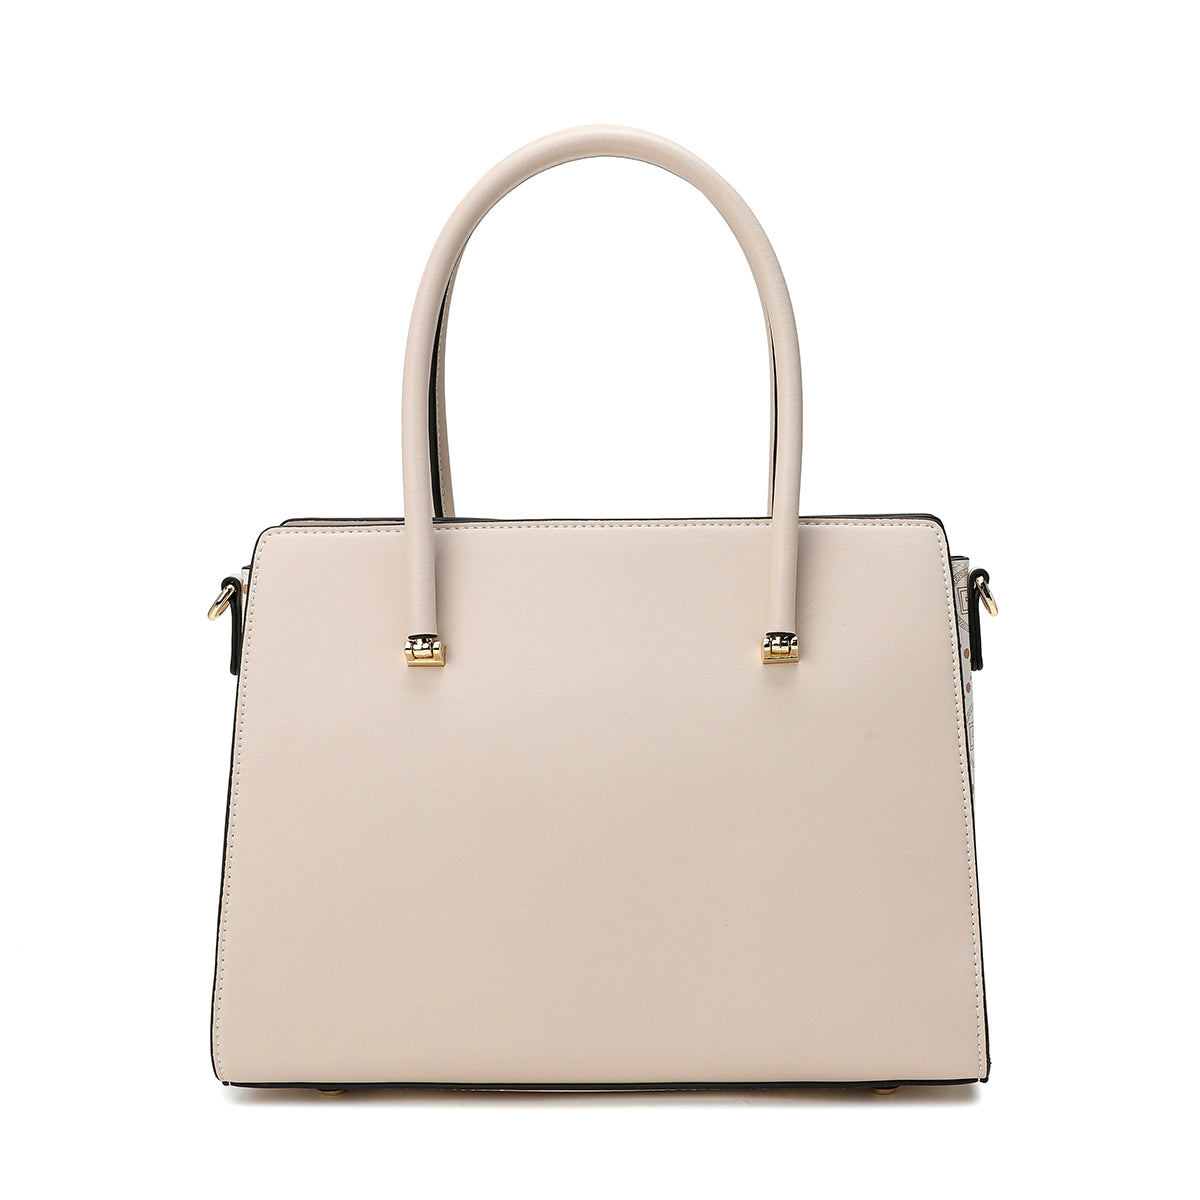 Plain luxury leather bag with gold accessories, beige color, width 27 cm